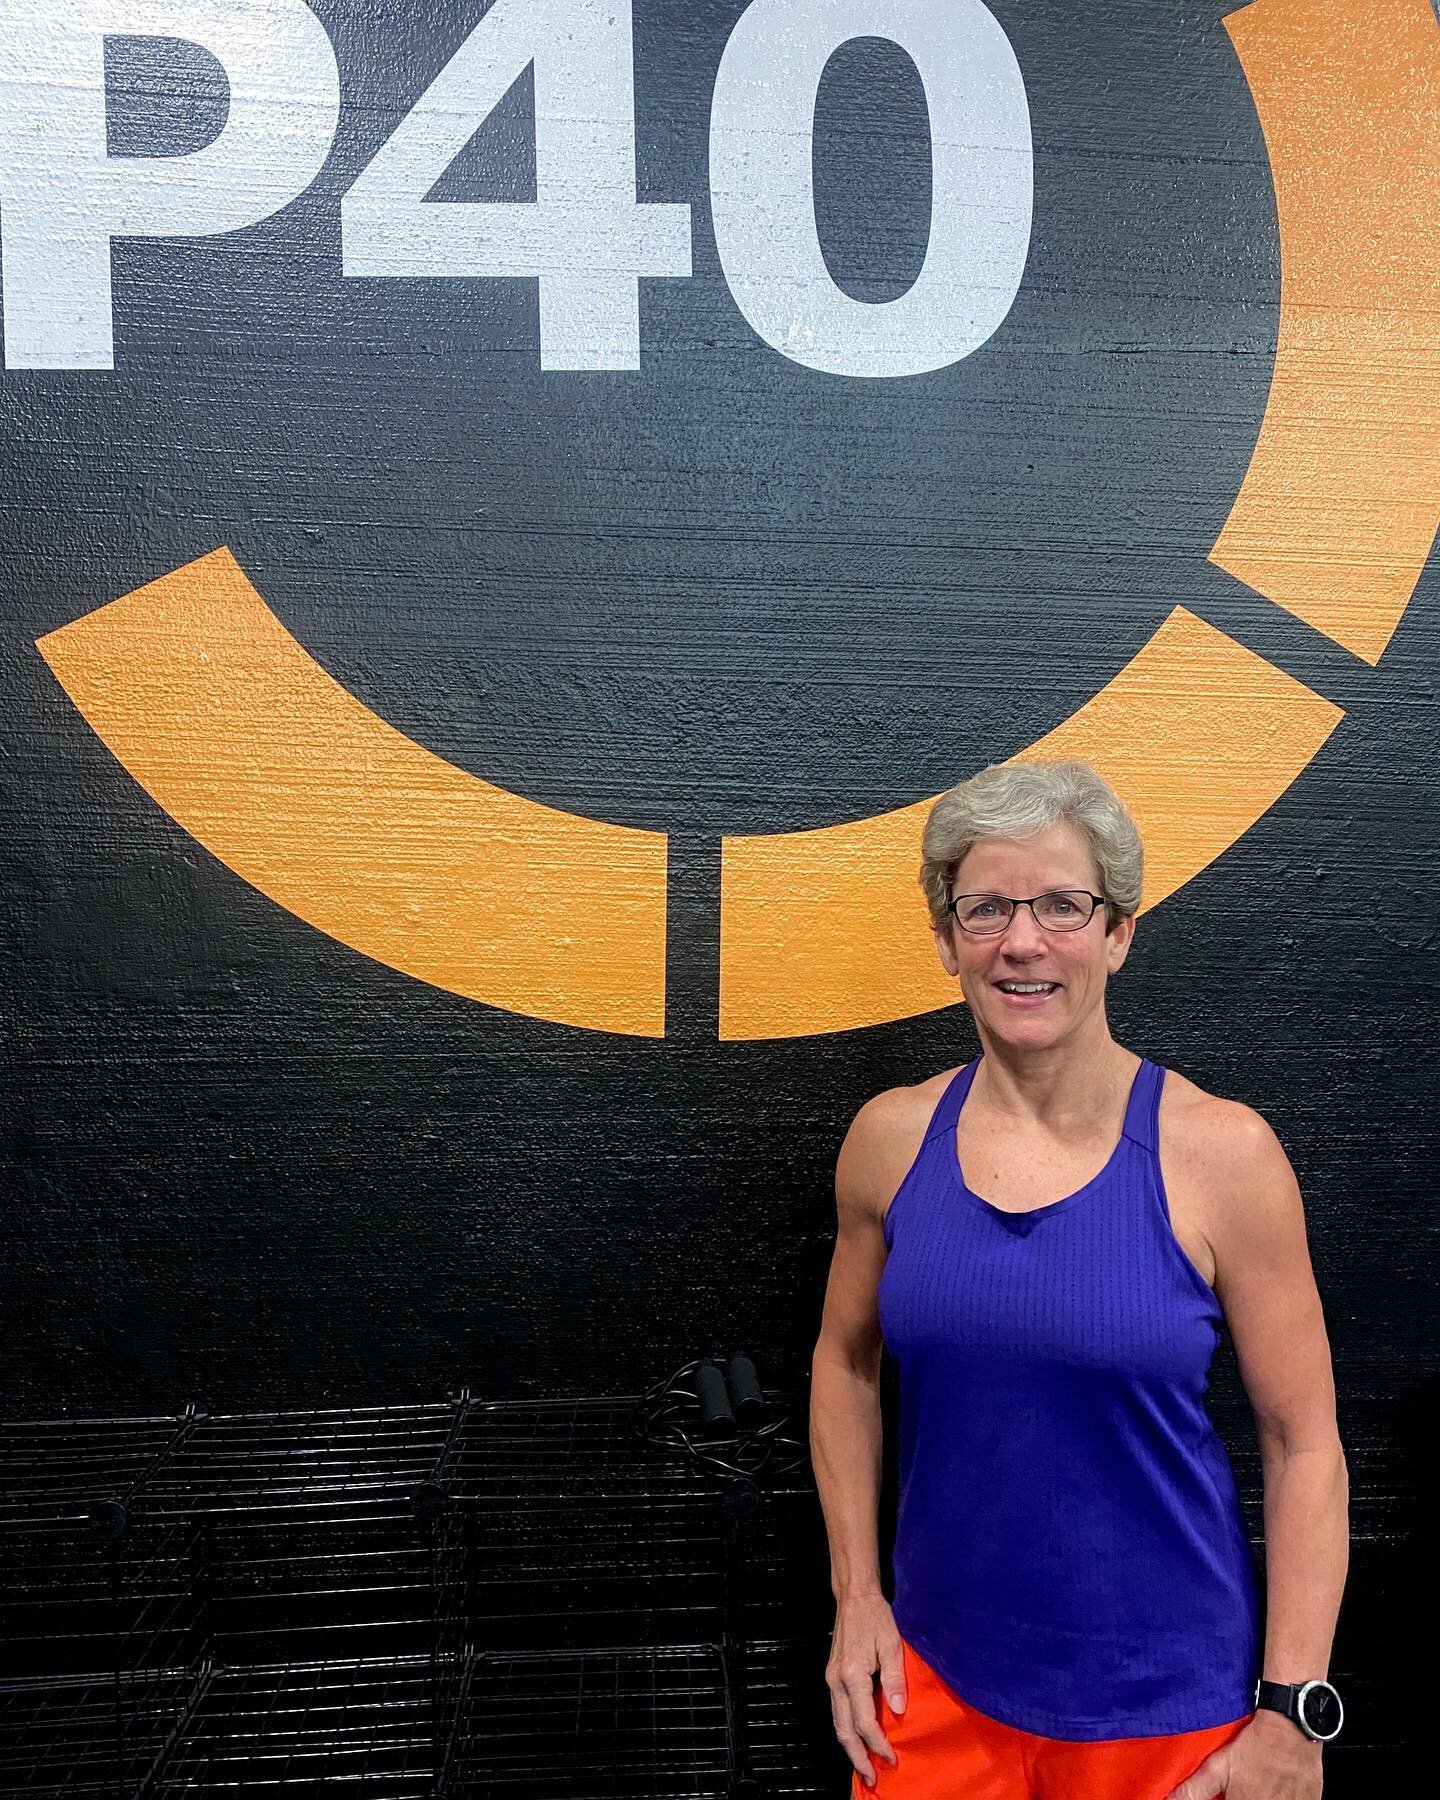 Lisa has been a member of Power40 since March 2021! ⚡️ Here&rsquo;s what she has to say:

&ldquo;I started Power40 because I liked the structure of a class and instructor. I also like challenging myself. What appealed to me the most was the flexibili